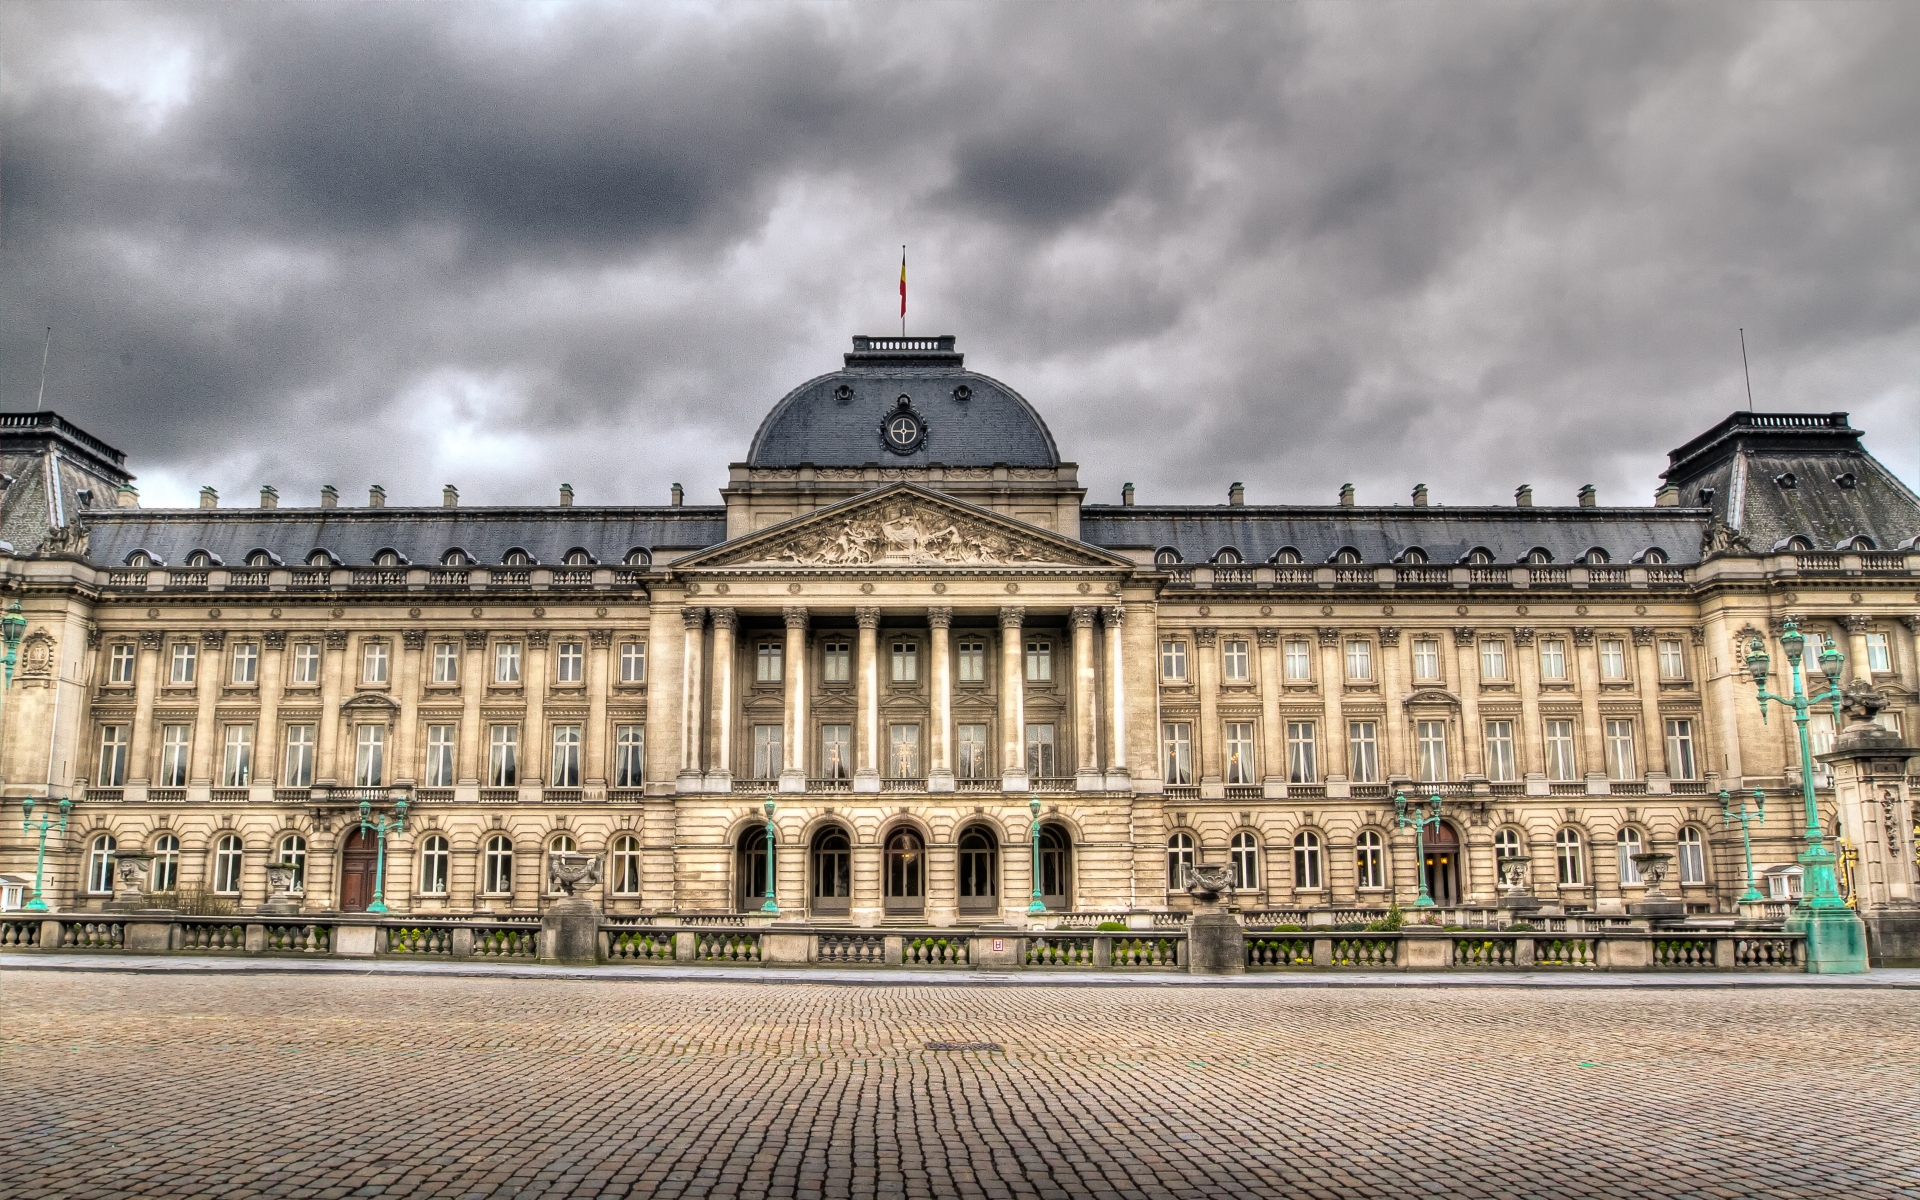 man made, royal palace of brussels, palaces